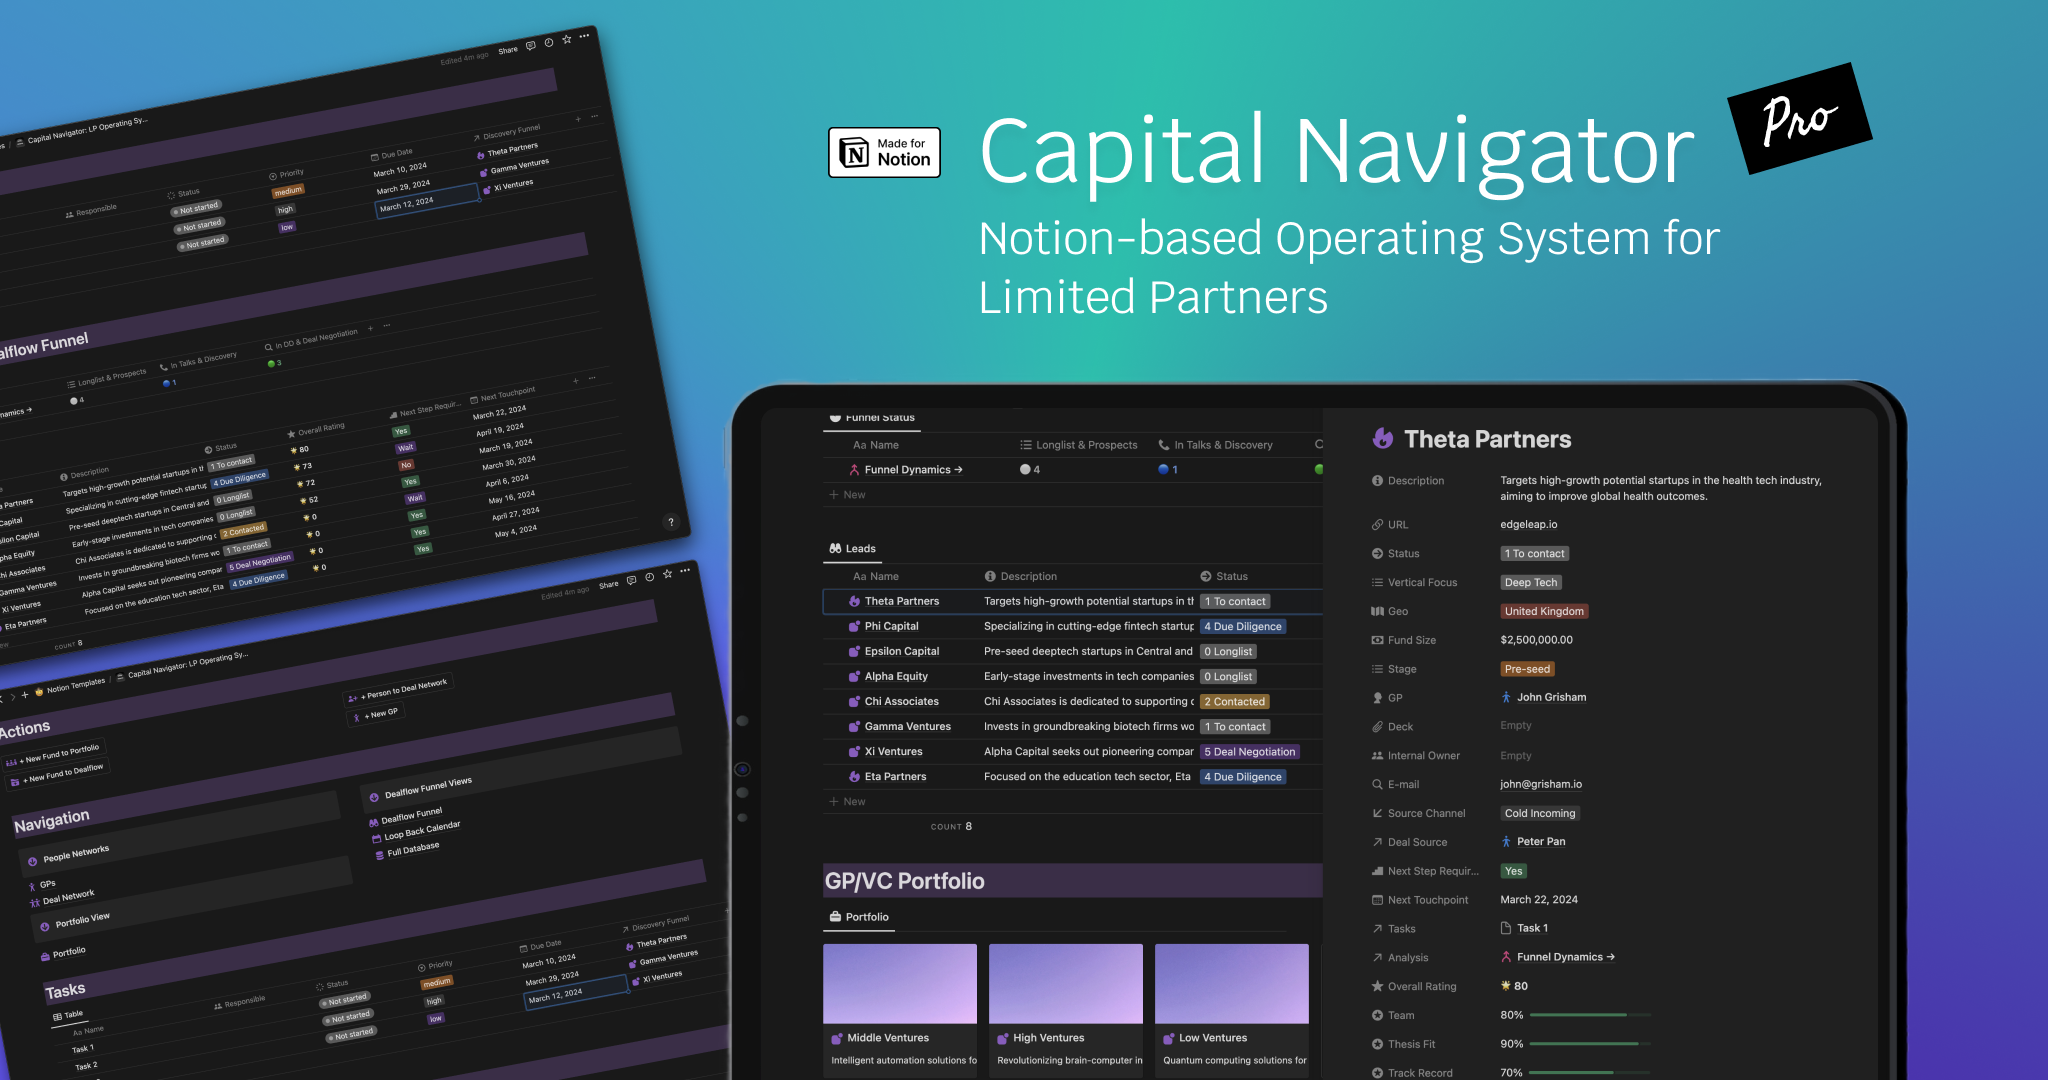 Capital Navigator: The LP Operating System streamlines investment processes for family offices & LPs. It combines a deal flow CRM, scoring, document management, and task tracking, with easy navigation and comprehensive people networks. Manage your VC deal flow and portfolio effor